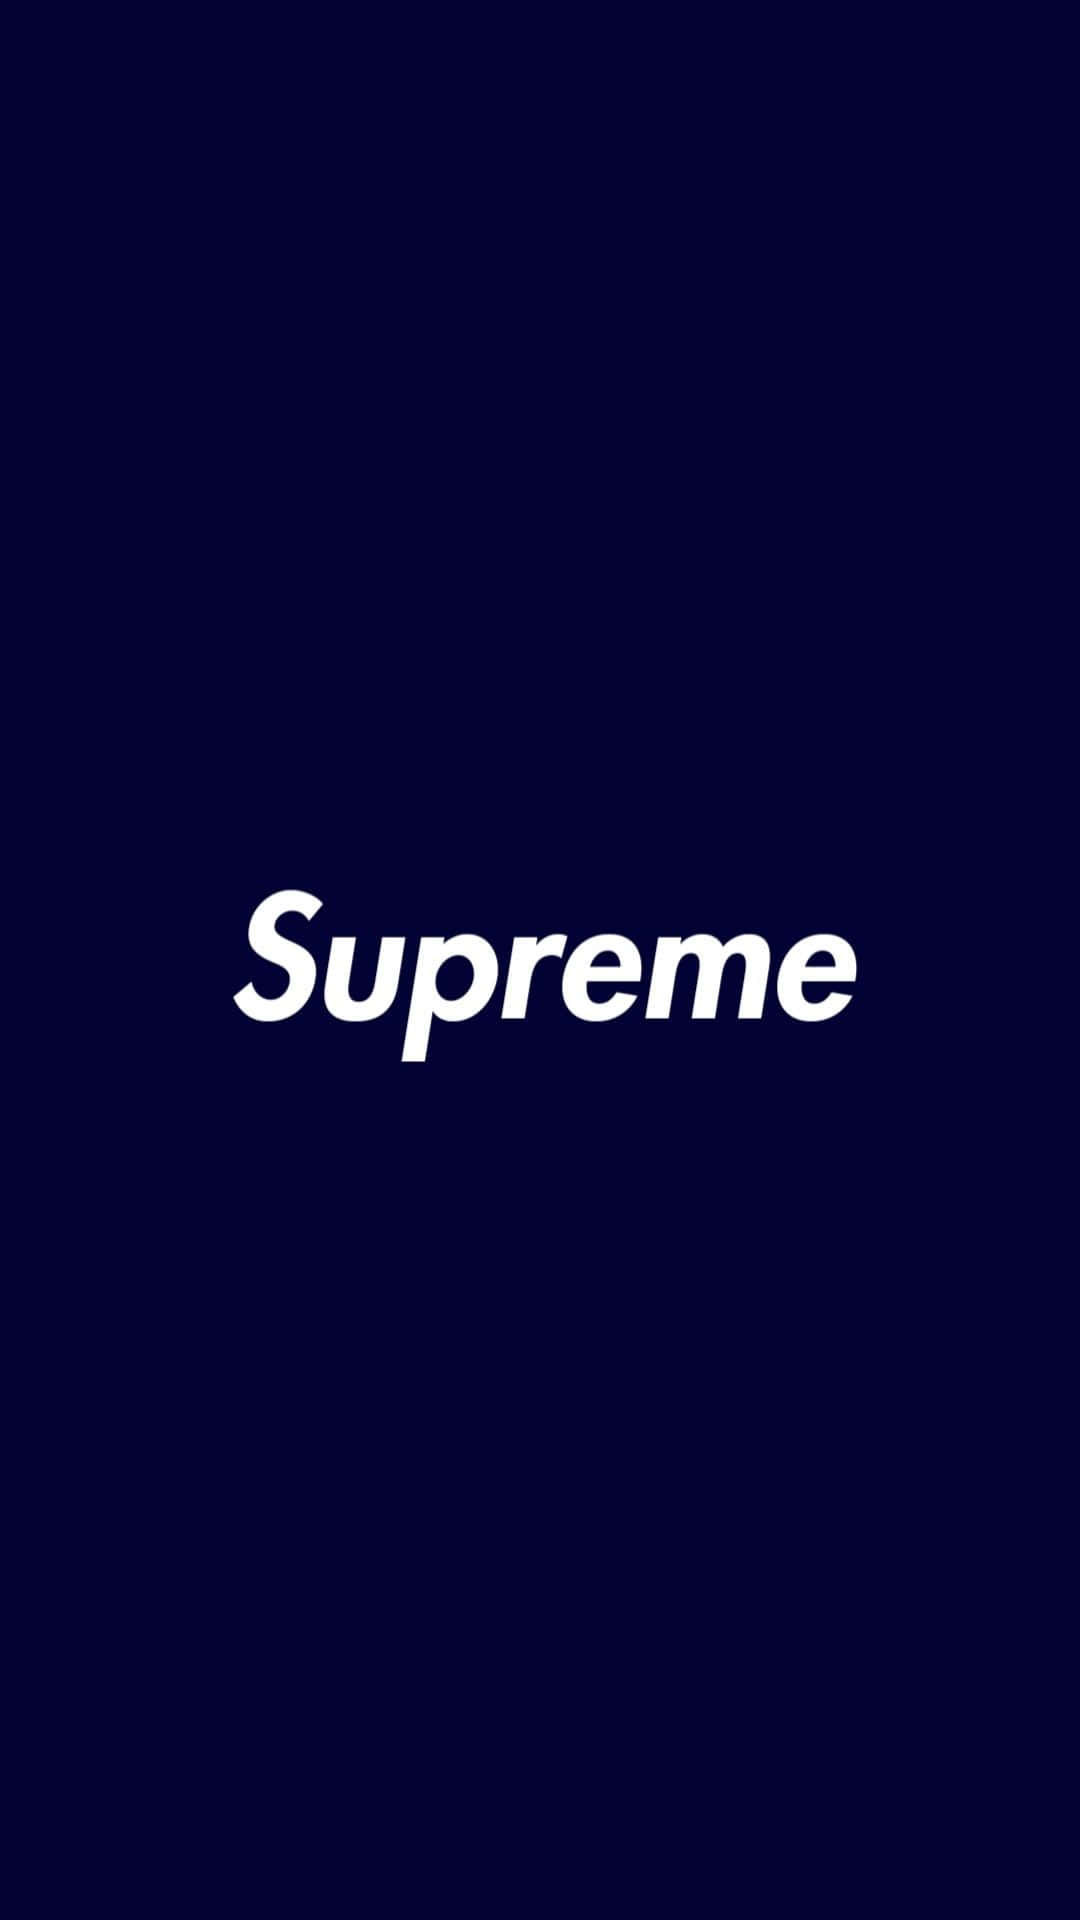 In Style And Comfort: Get The Look With Blue Supreme